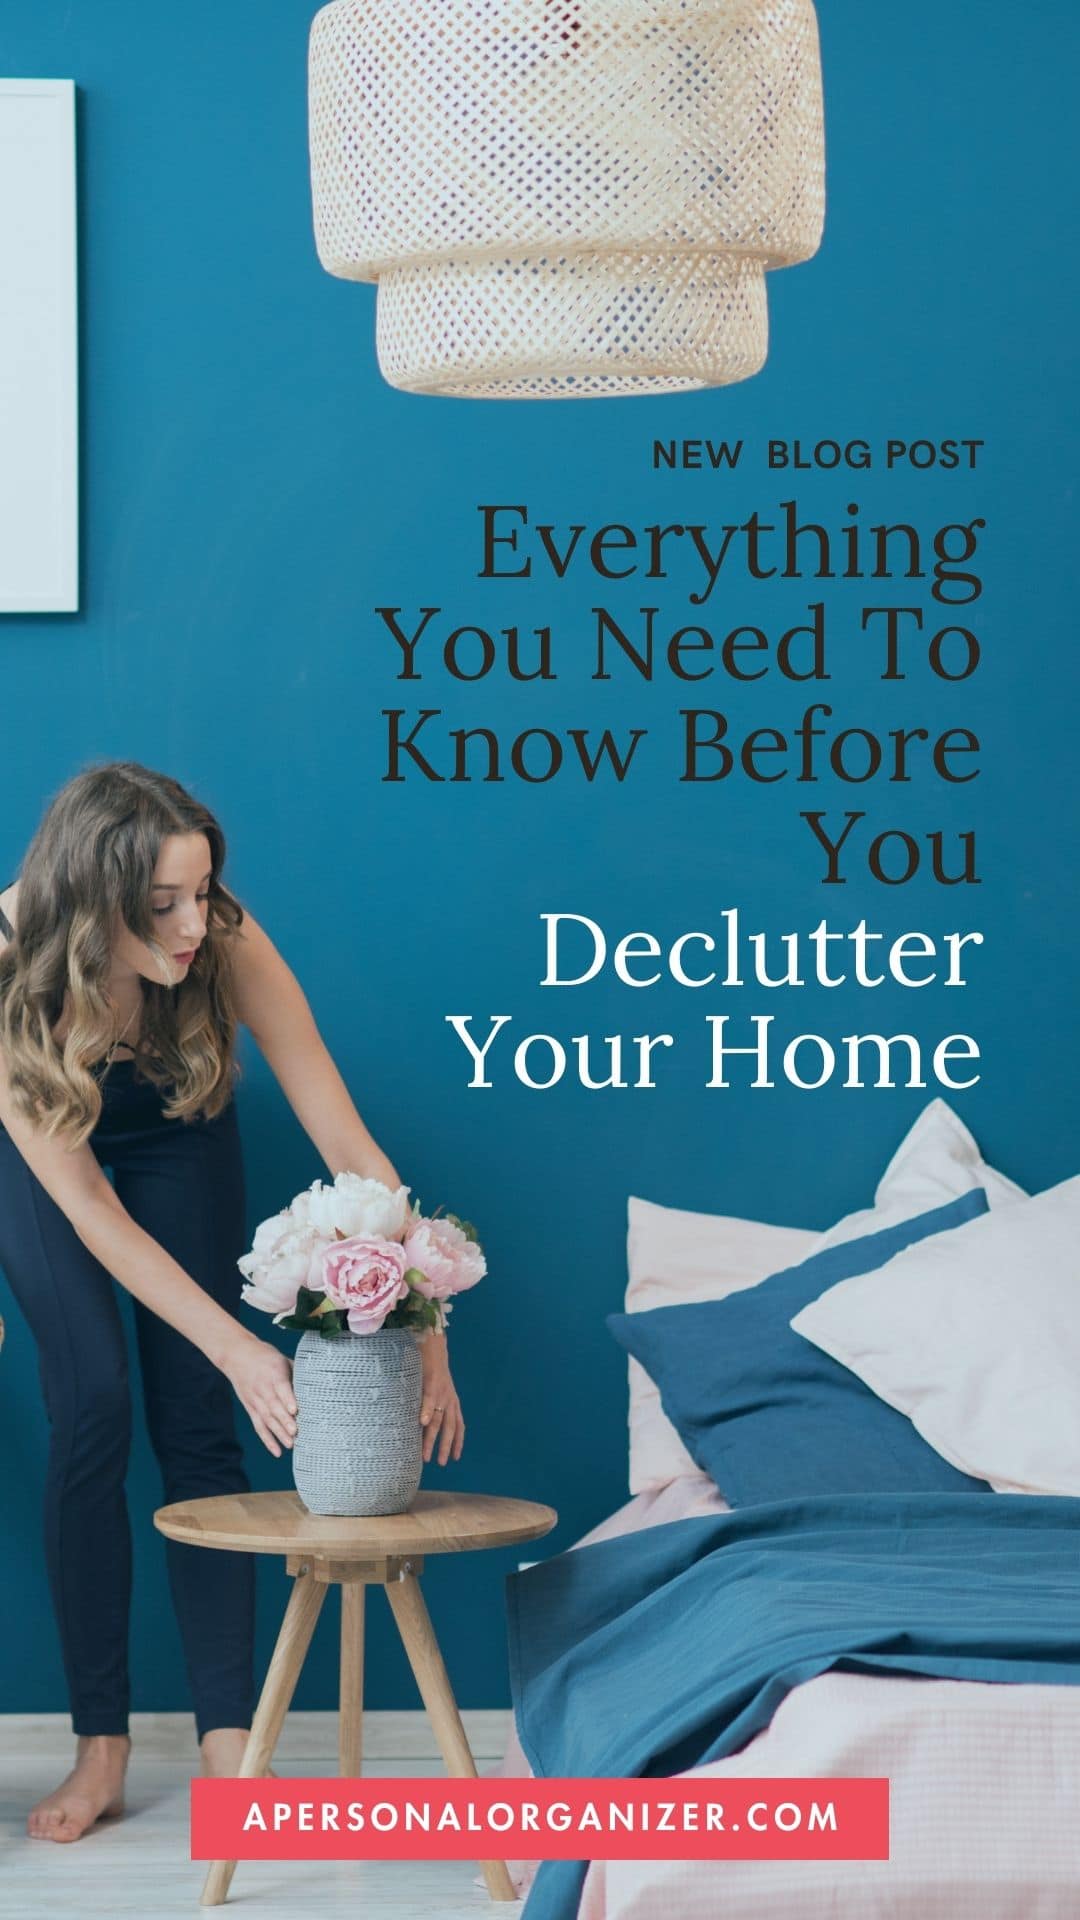 Dear Fiona: how do you declutter stuff you actually want to keep